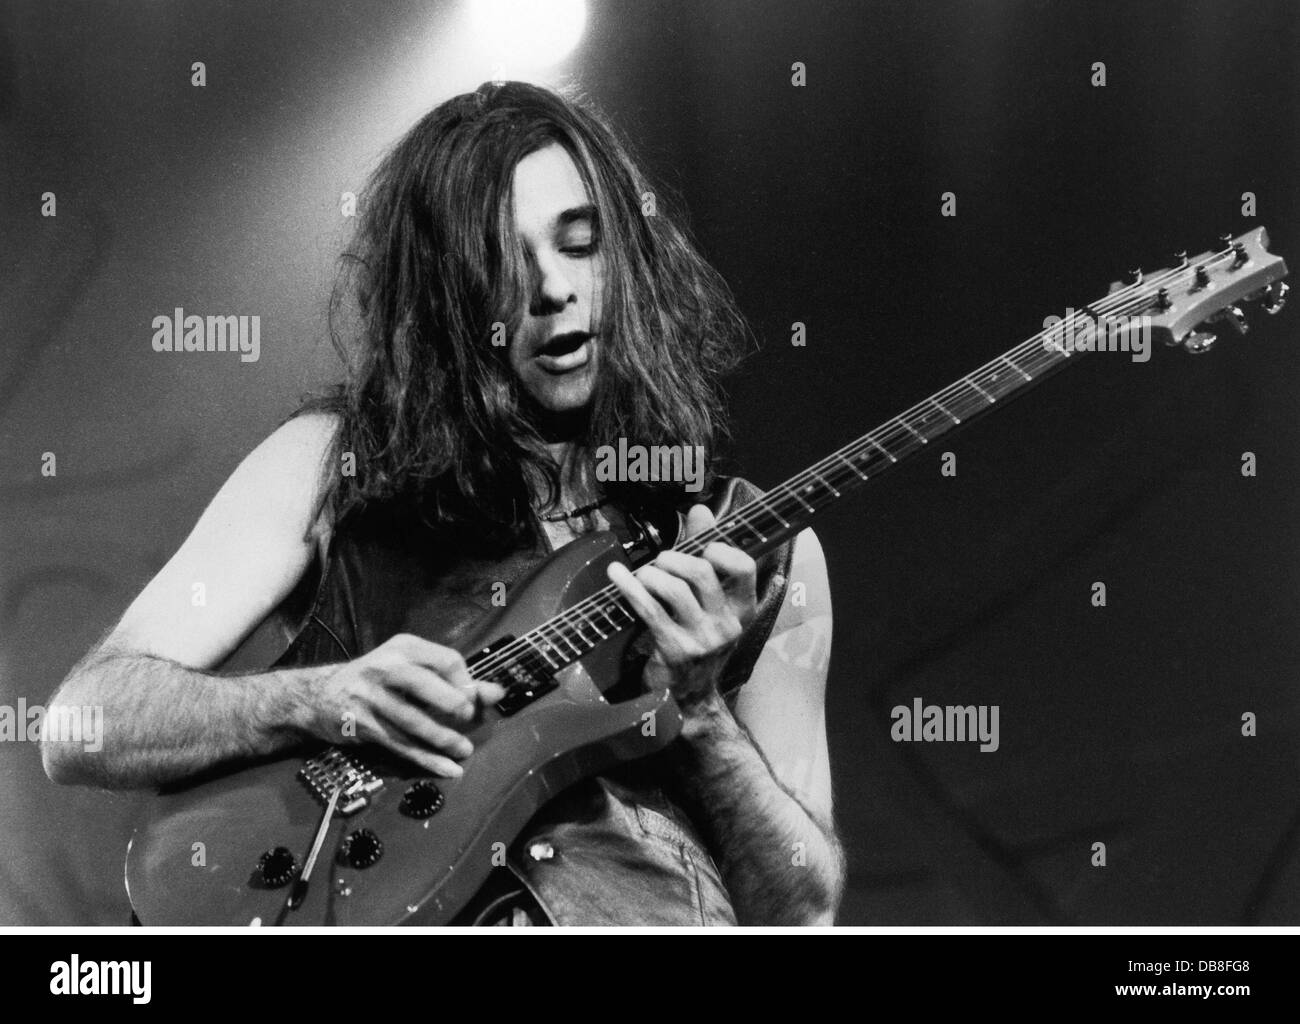 Pereira, Heitor, * 29.11.1960, Brazil musician, guitarist, half length, during stage performance, Montreux, 1994, Stock Photo